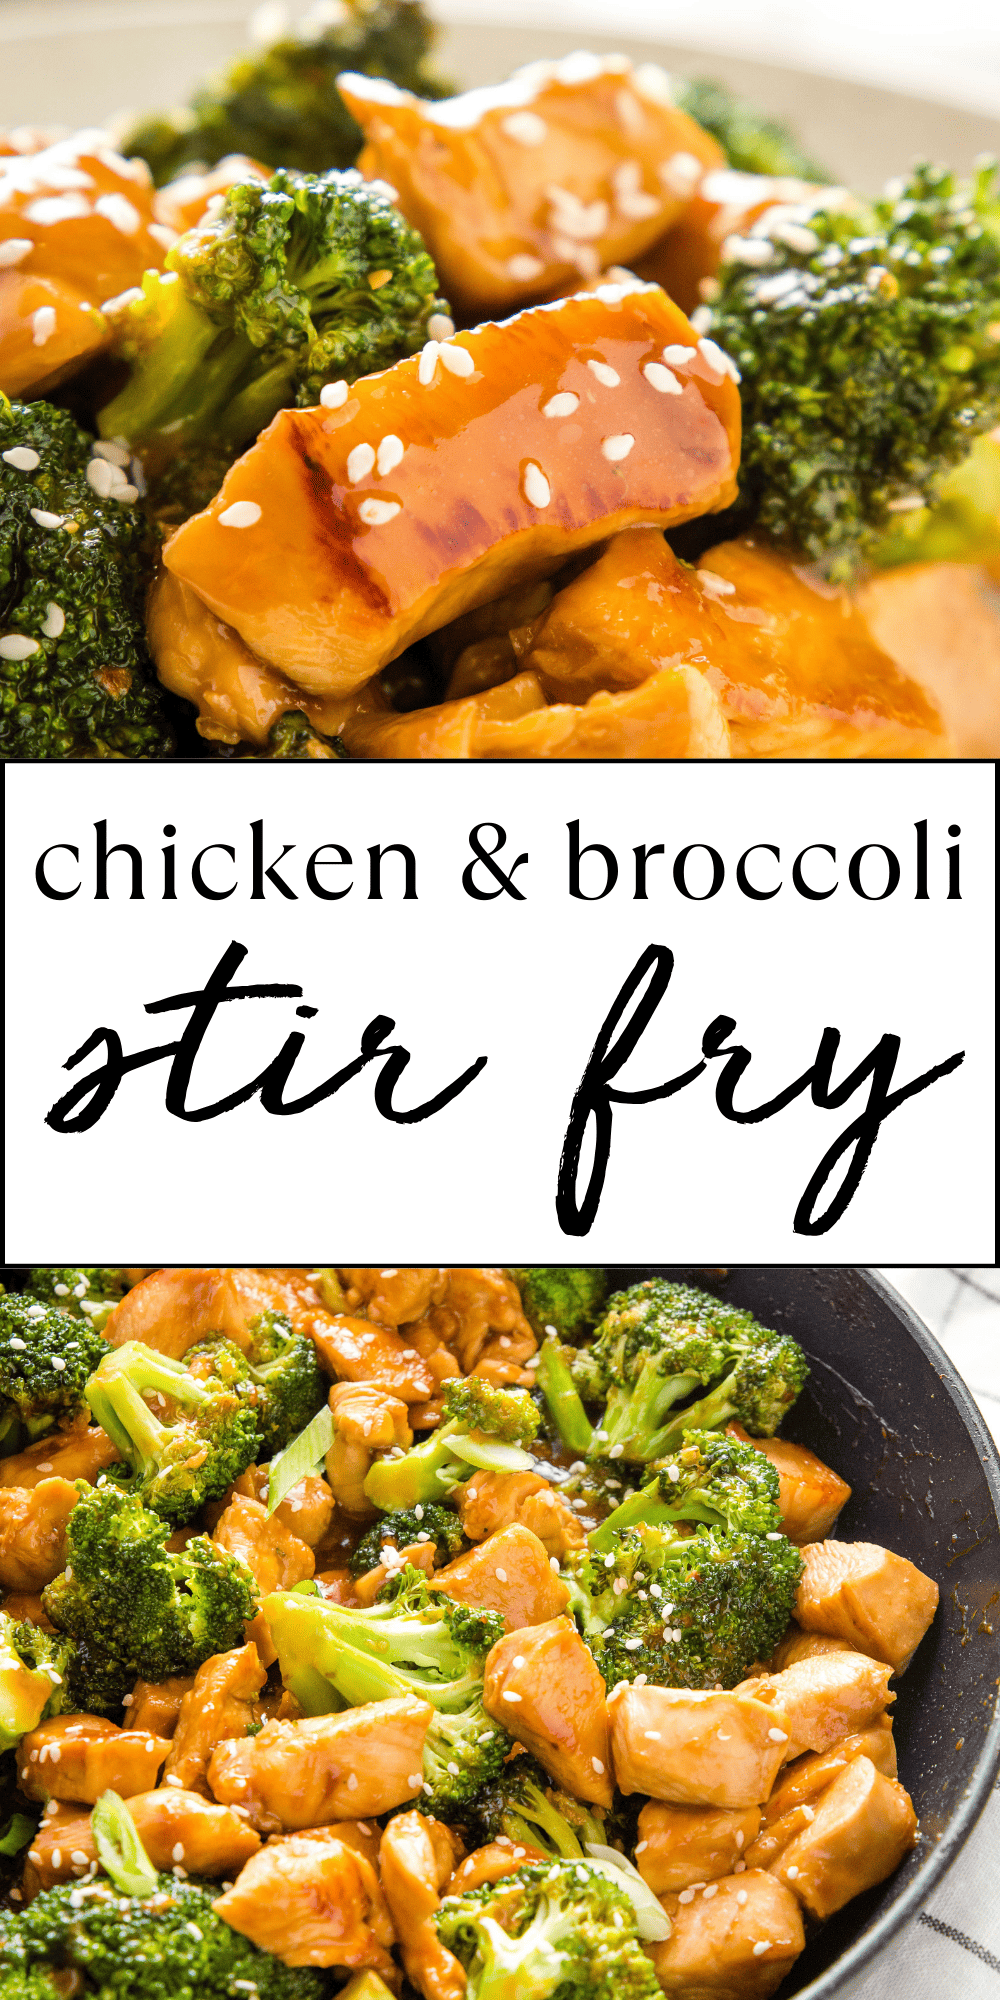 This Chicken and Broccoli Stir Fry recipe is an easy weeknight meal that’s packed with lean protein and fresh vegetables – and it's on the table in under 30 minutes. A simple Chinese chicken and Broccoli stir fry with an easy sauce and marinade – perfect for meal prep! Recipe from thebusybaker.ca! #chinesechickenandbroccoli #chickenandbroccoli #easystirfry #chickenandbroccolistirfry #easymeal #quickdinner #familymeal #dinner #takeout via @busybakerblog